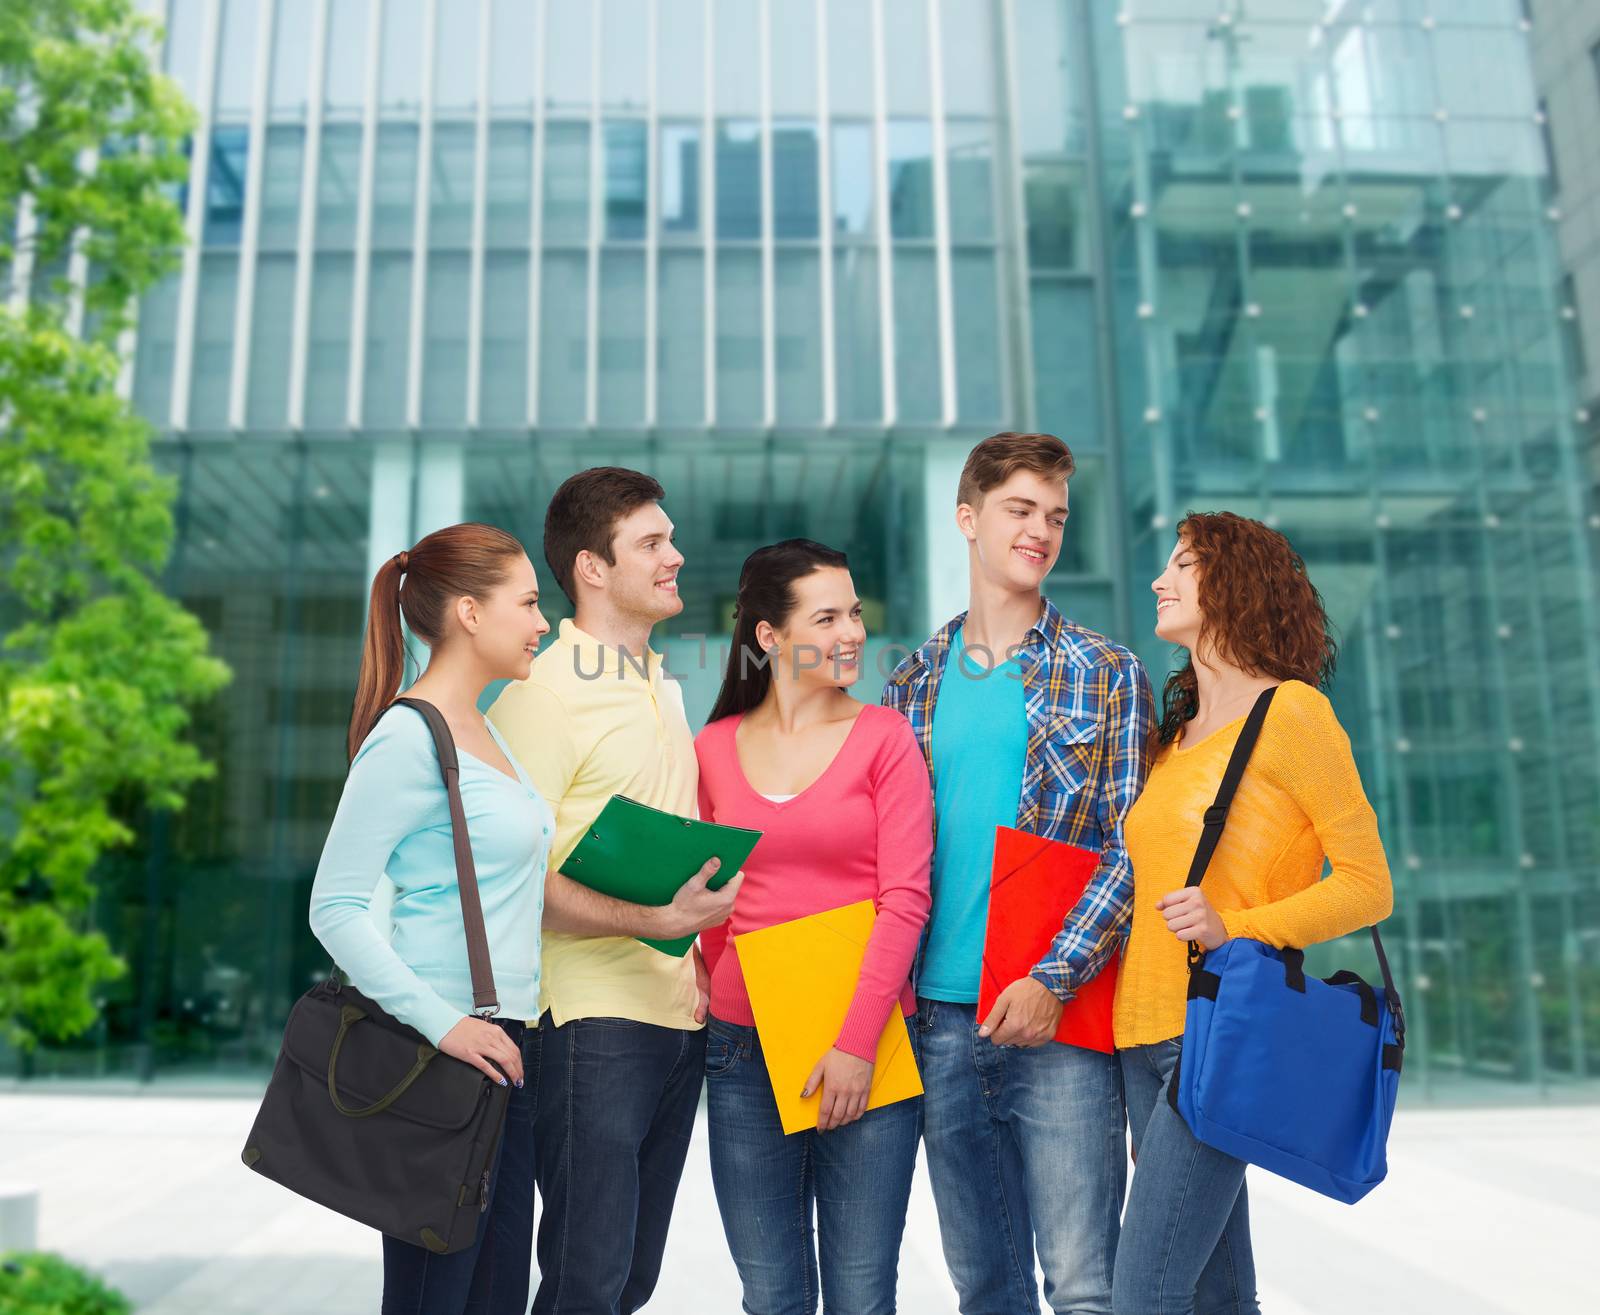 friendship, business, education and people concept - group of smiling teenagers with folders and school bags over campus background